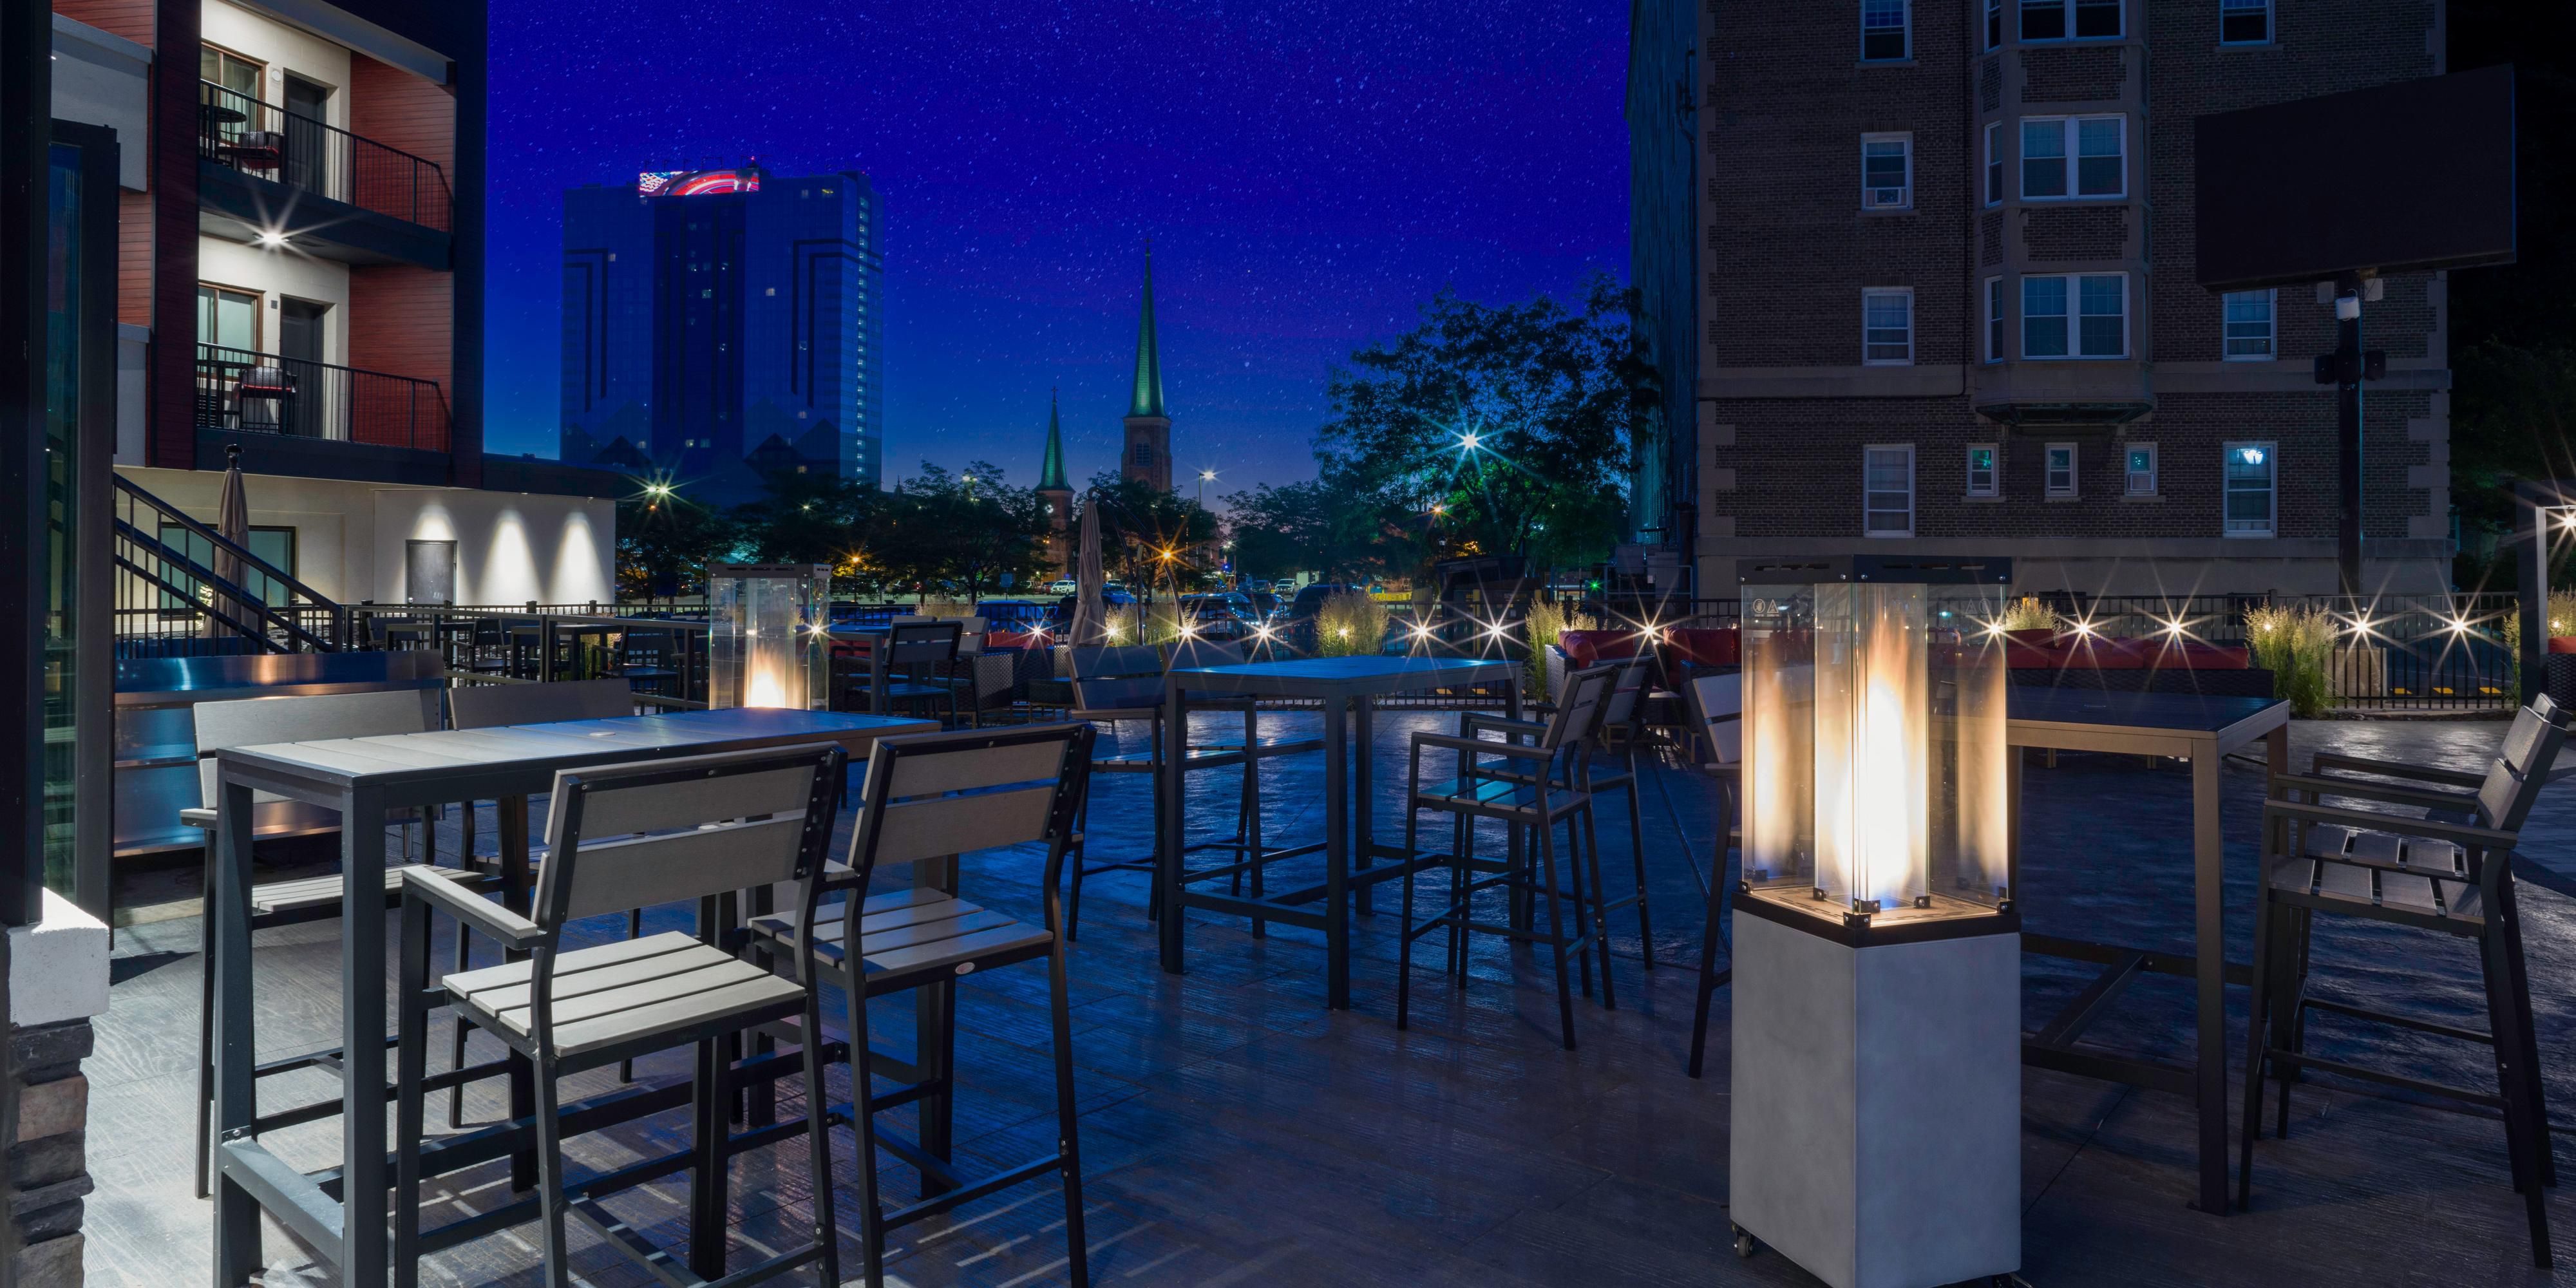 Gather with friends and enjoy some quality time in nature on our outdoor patio, featuring a beautiful space with a fireplace. Grab a drink, mingle, and get cozy under the stars. 